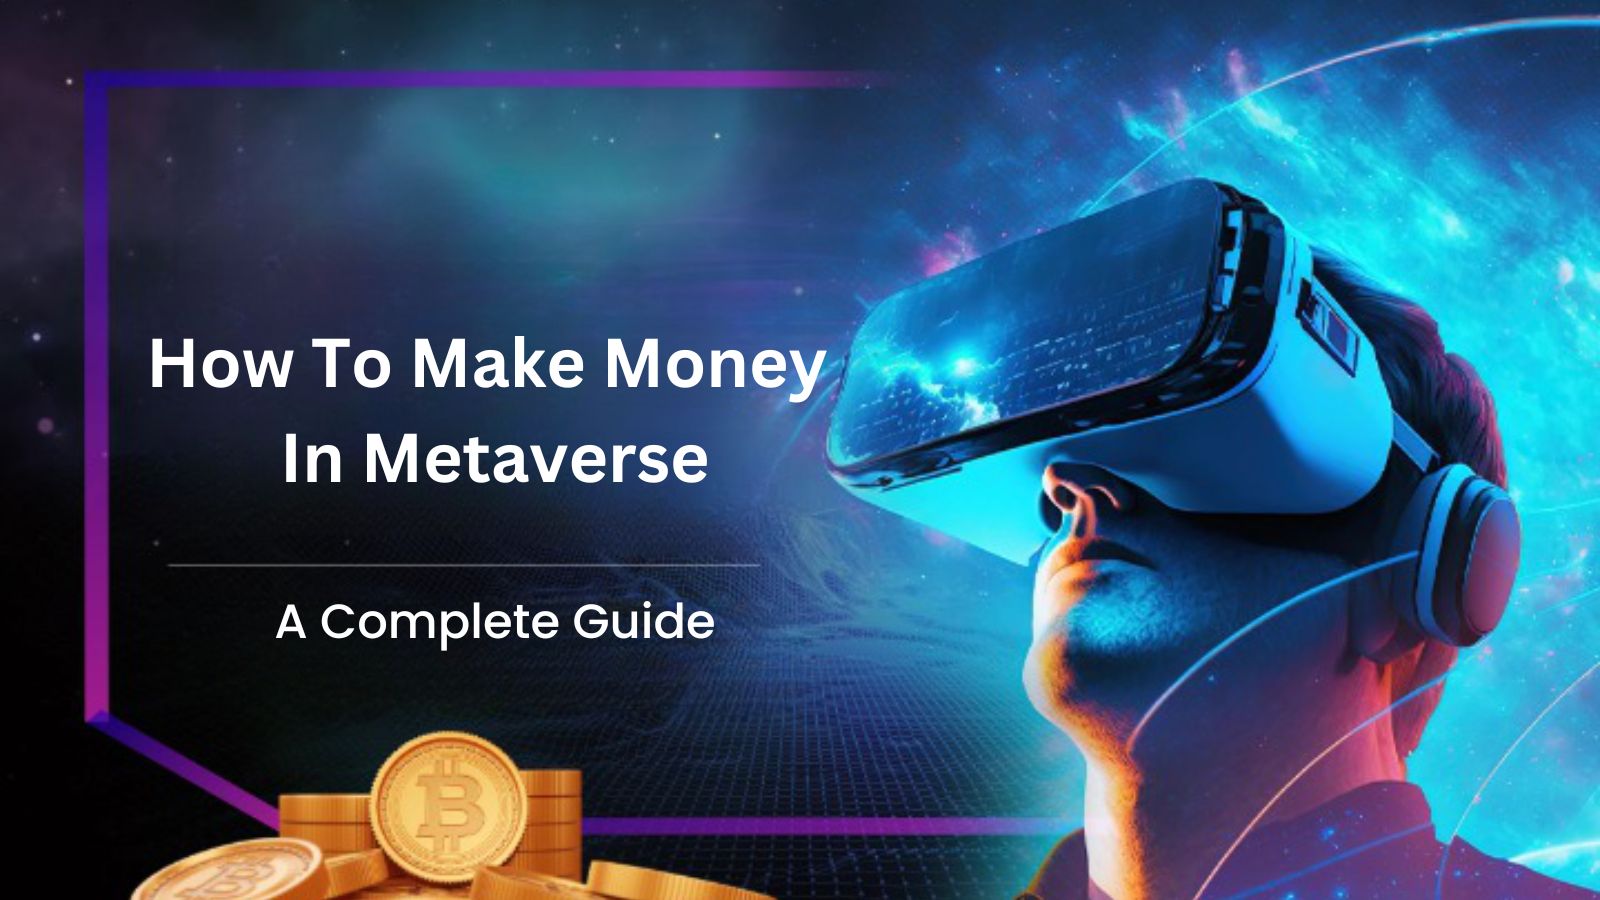 How To Make Money In Metaverse : A Guide to Maximize Your Metaverse Earnings